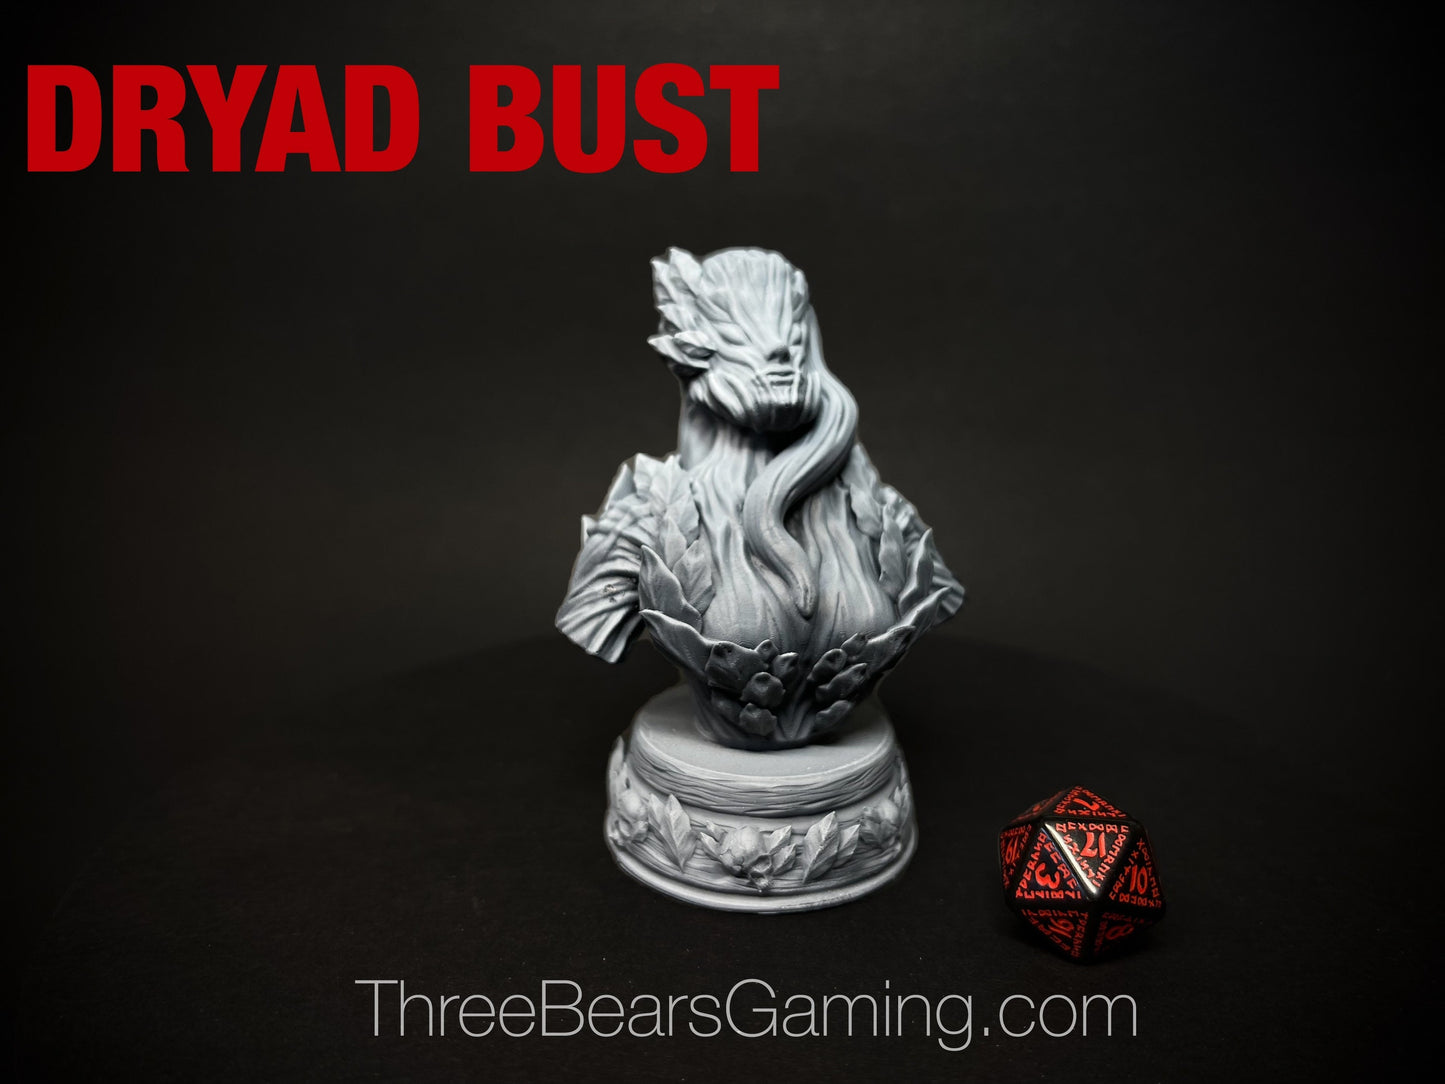 DRYAD BUST, by Cursed Forge Miniatures // 3D Print on Demand / D&D / Pathfinder / RPG